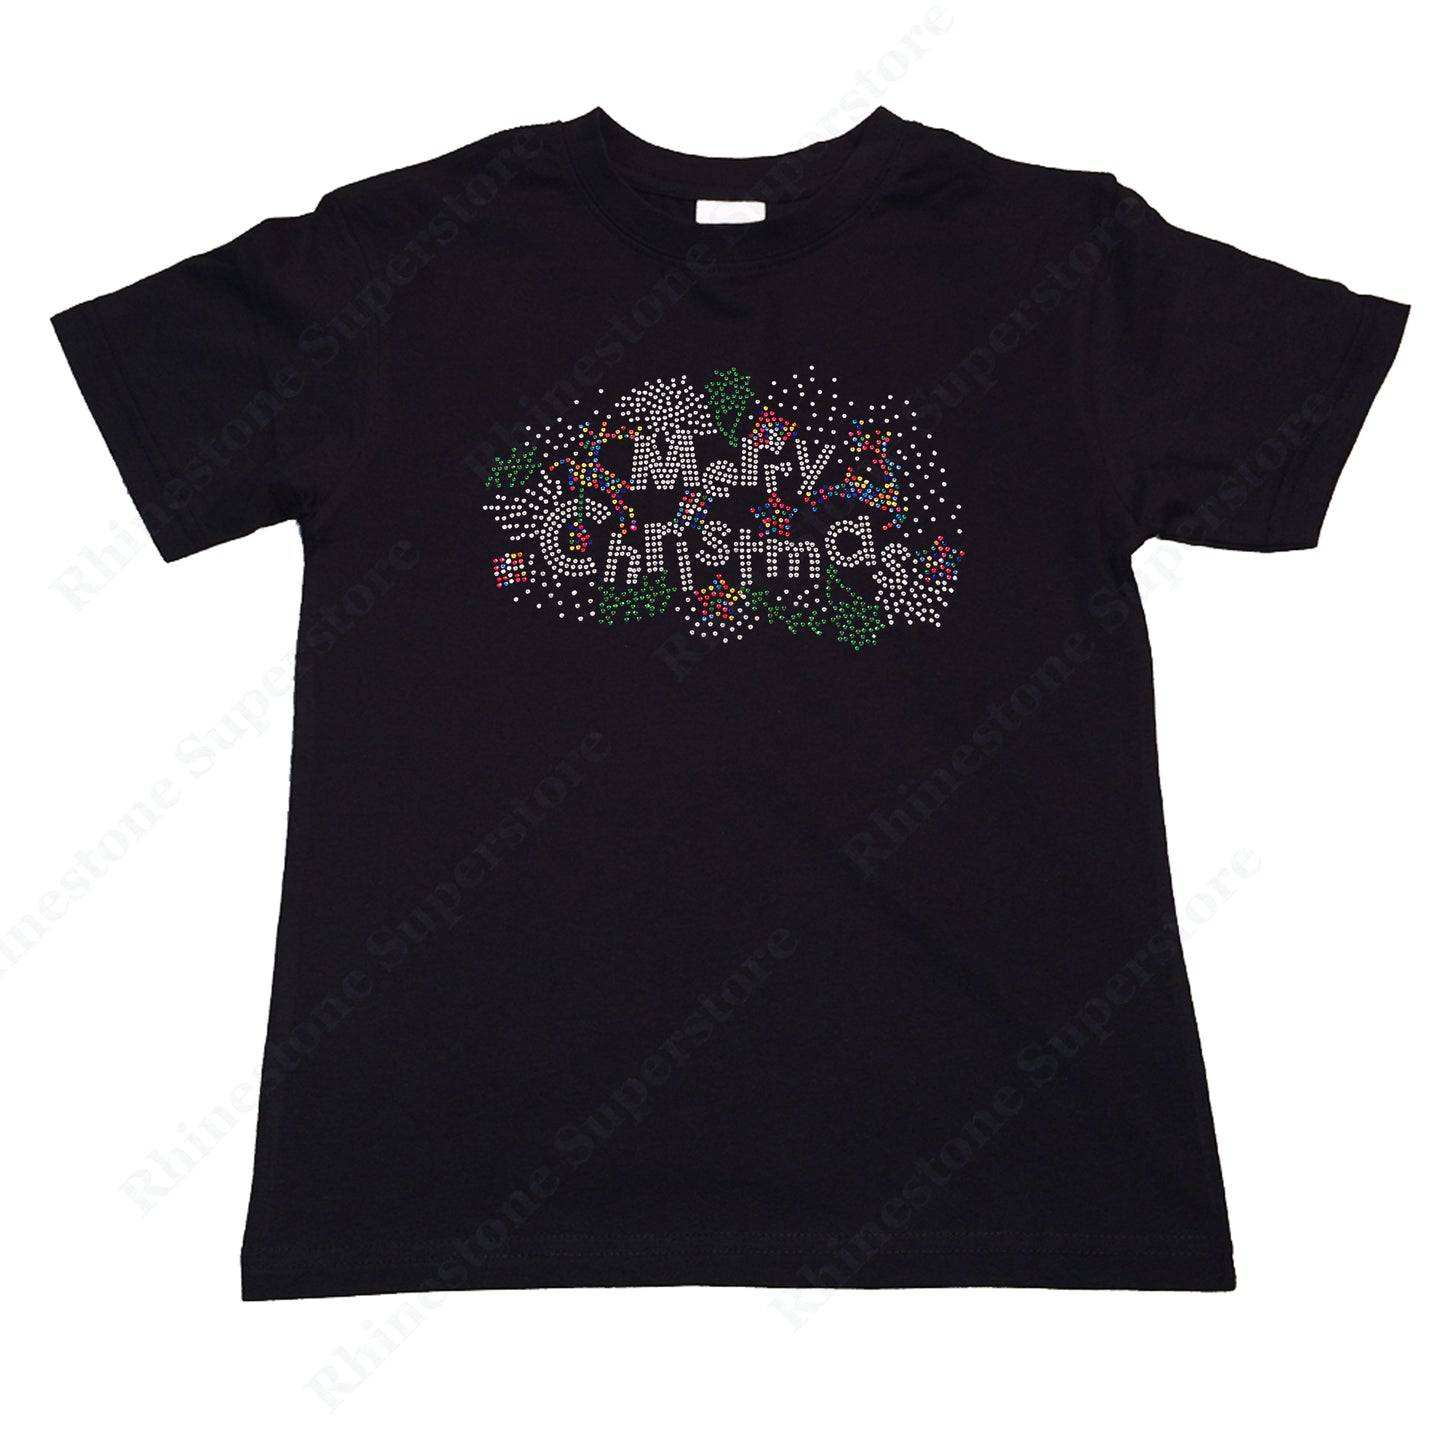 Girls Rhinestone T-Shirt " Colorful Merry Christmas " Kids Size 3 to 14 Available